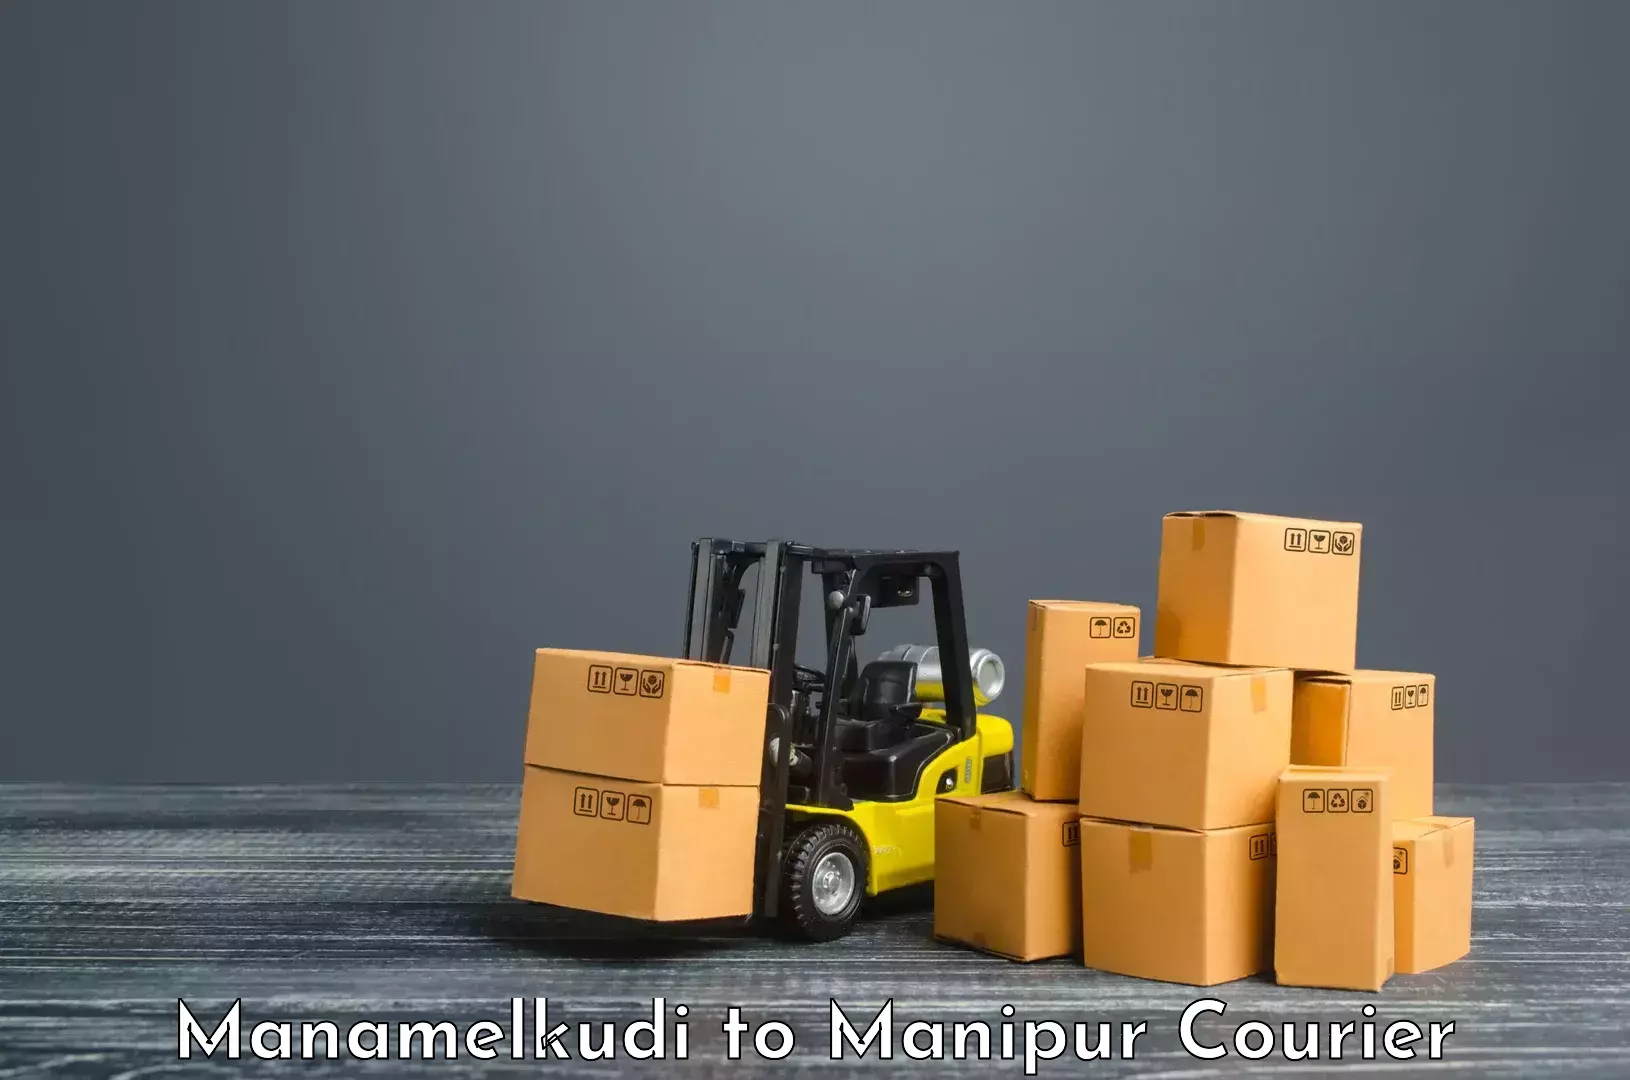 Advanced package delivery Manamelkudi to Chandel